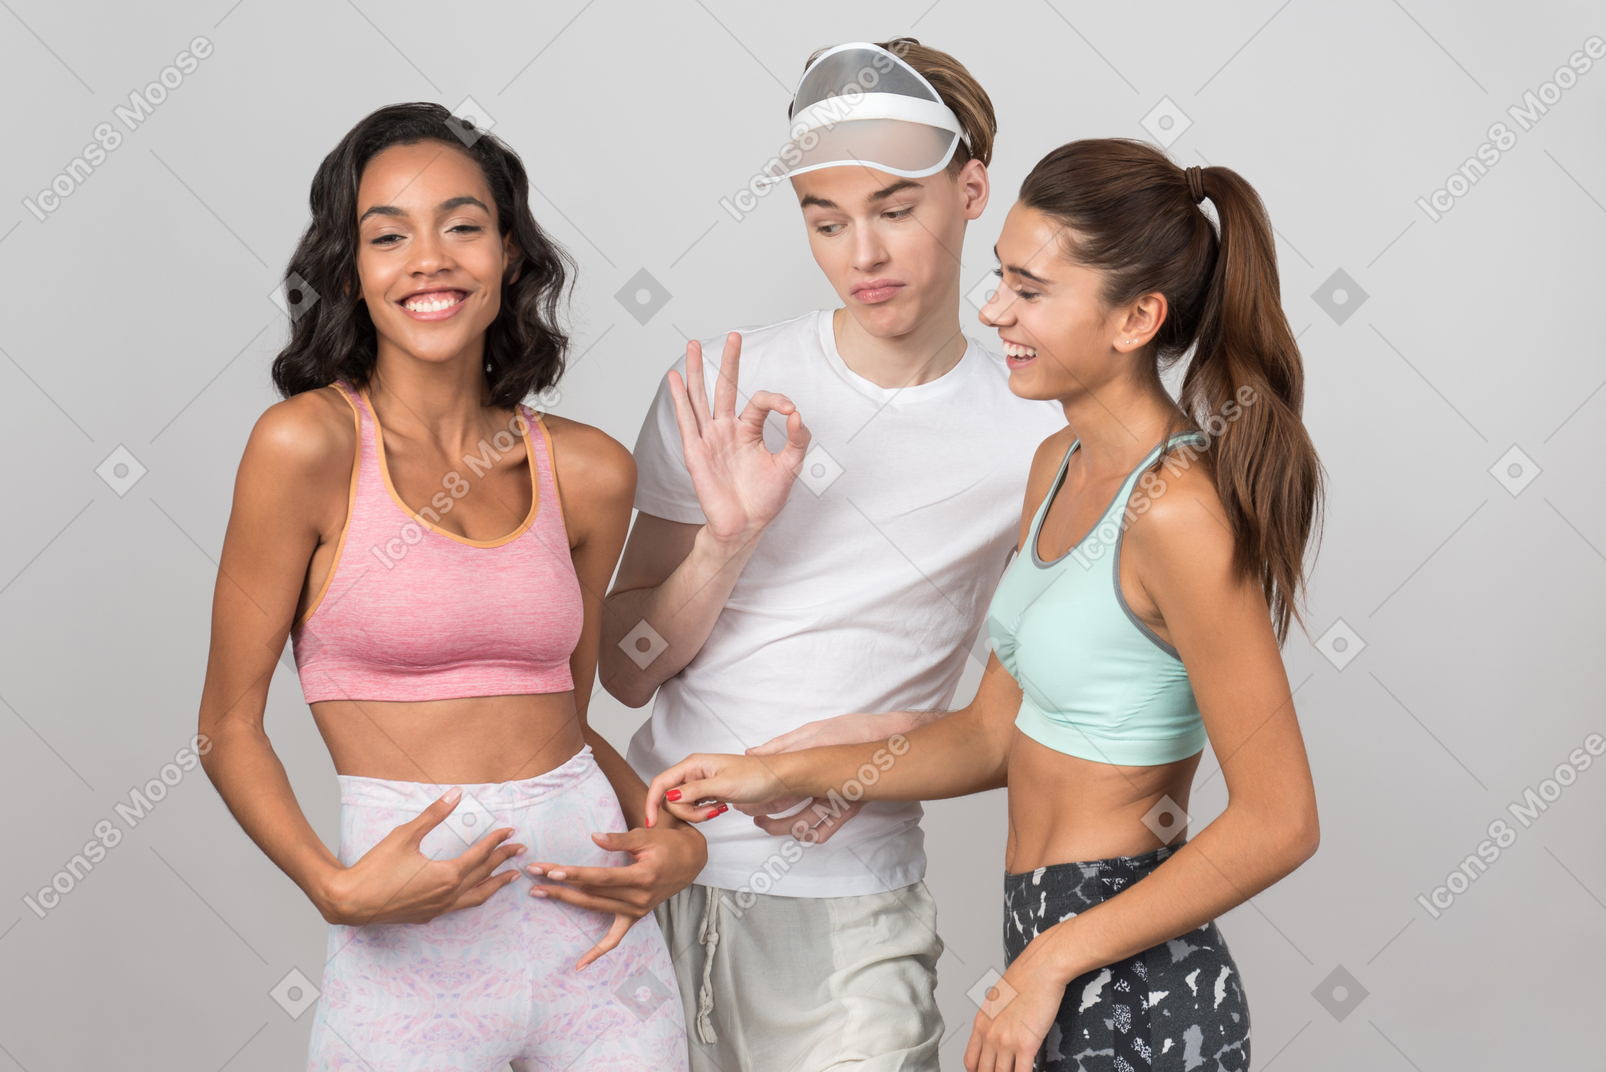 Friends checking out their girlfriend's shape